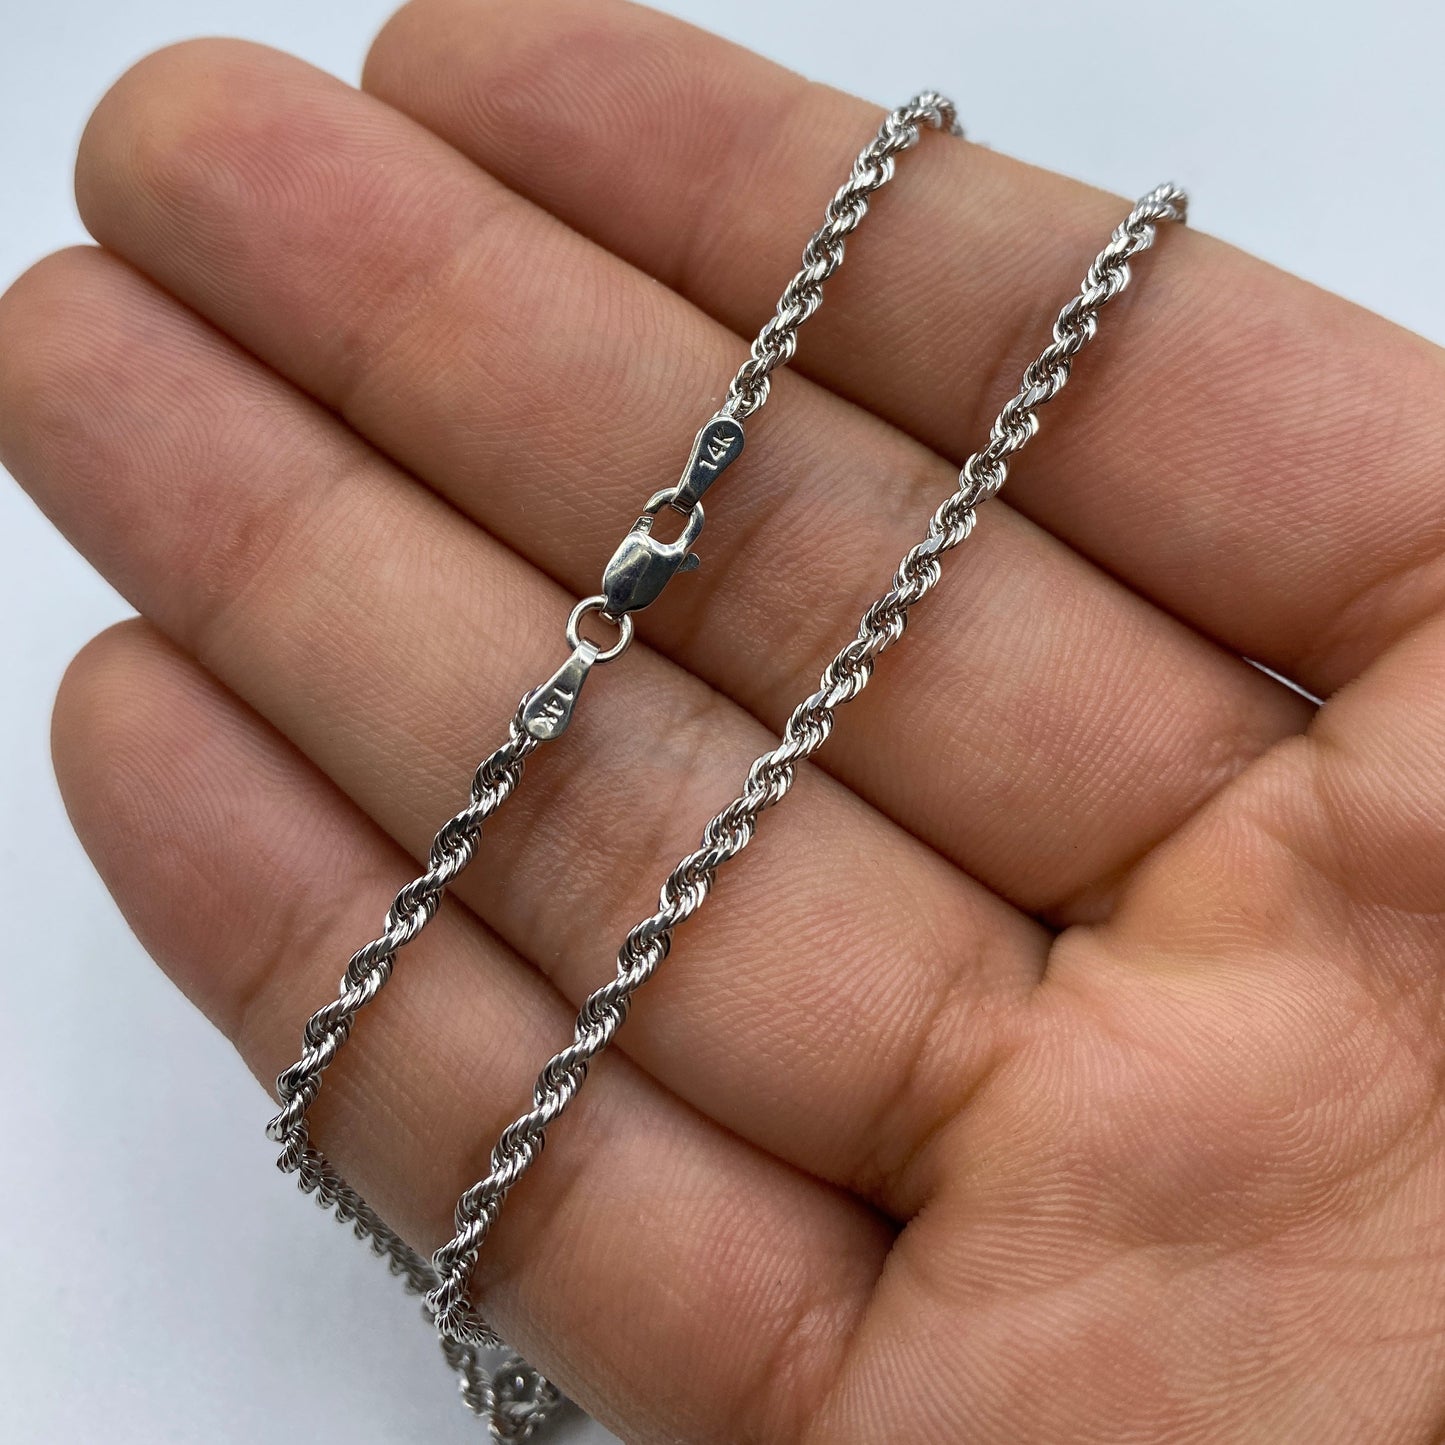 14K White Gold 2.7MM Rope Chain 16-26"